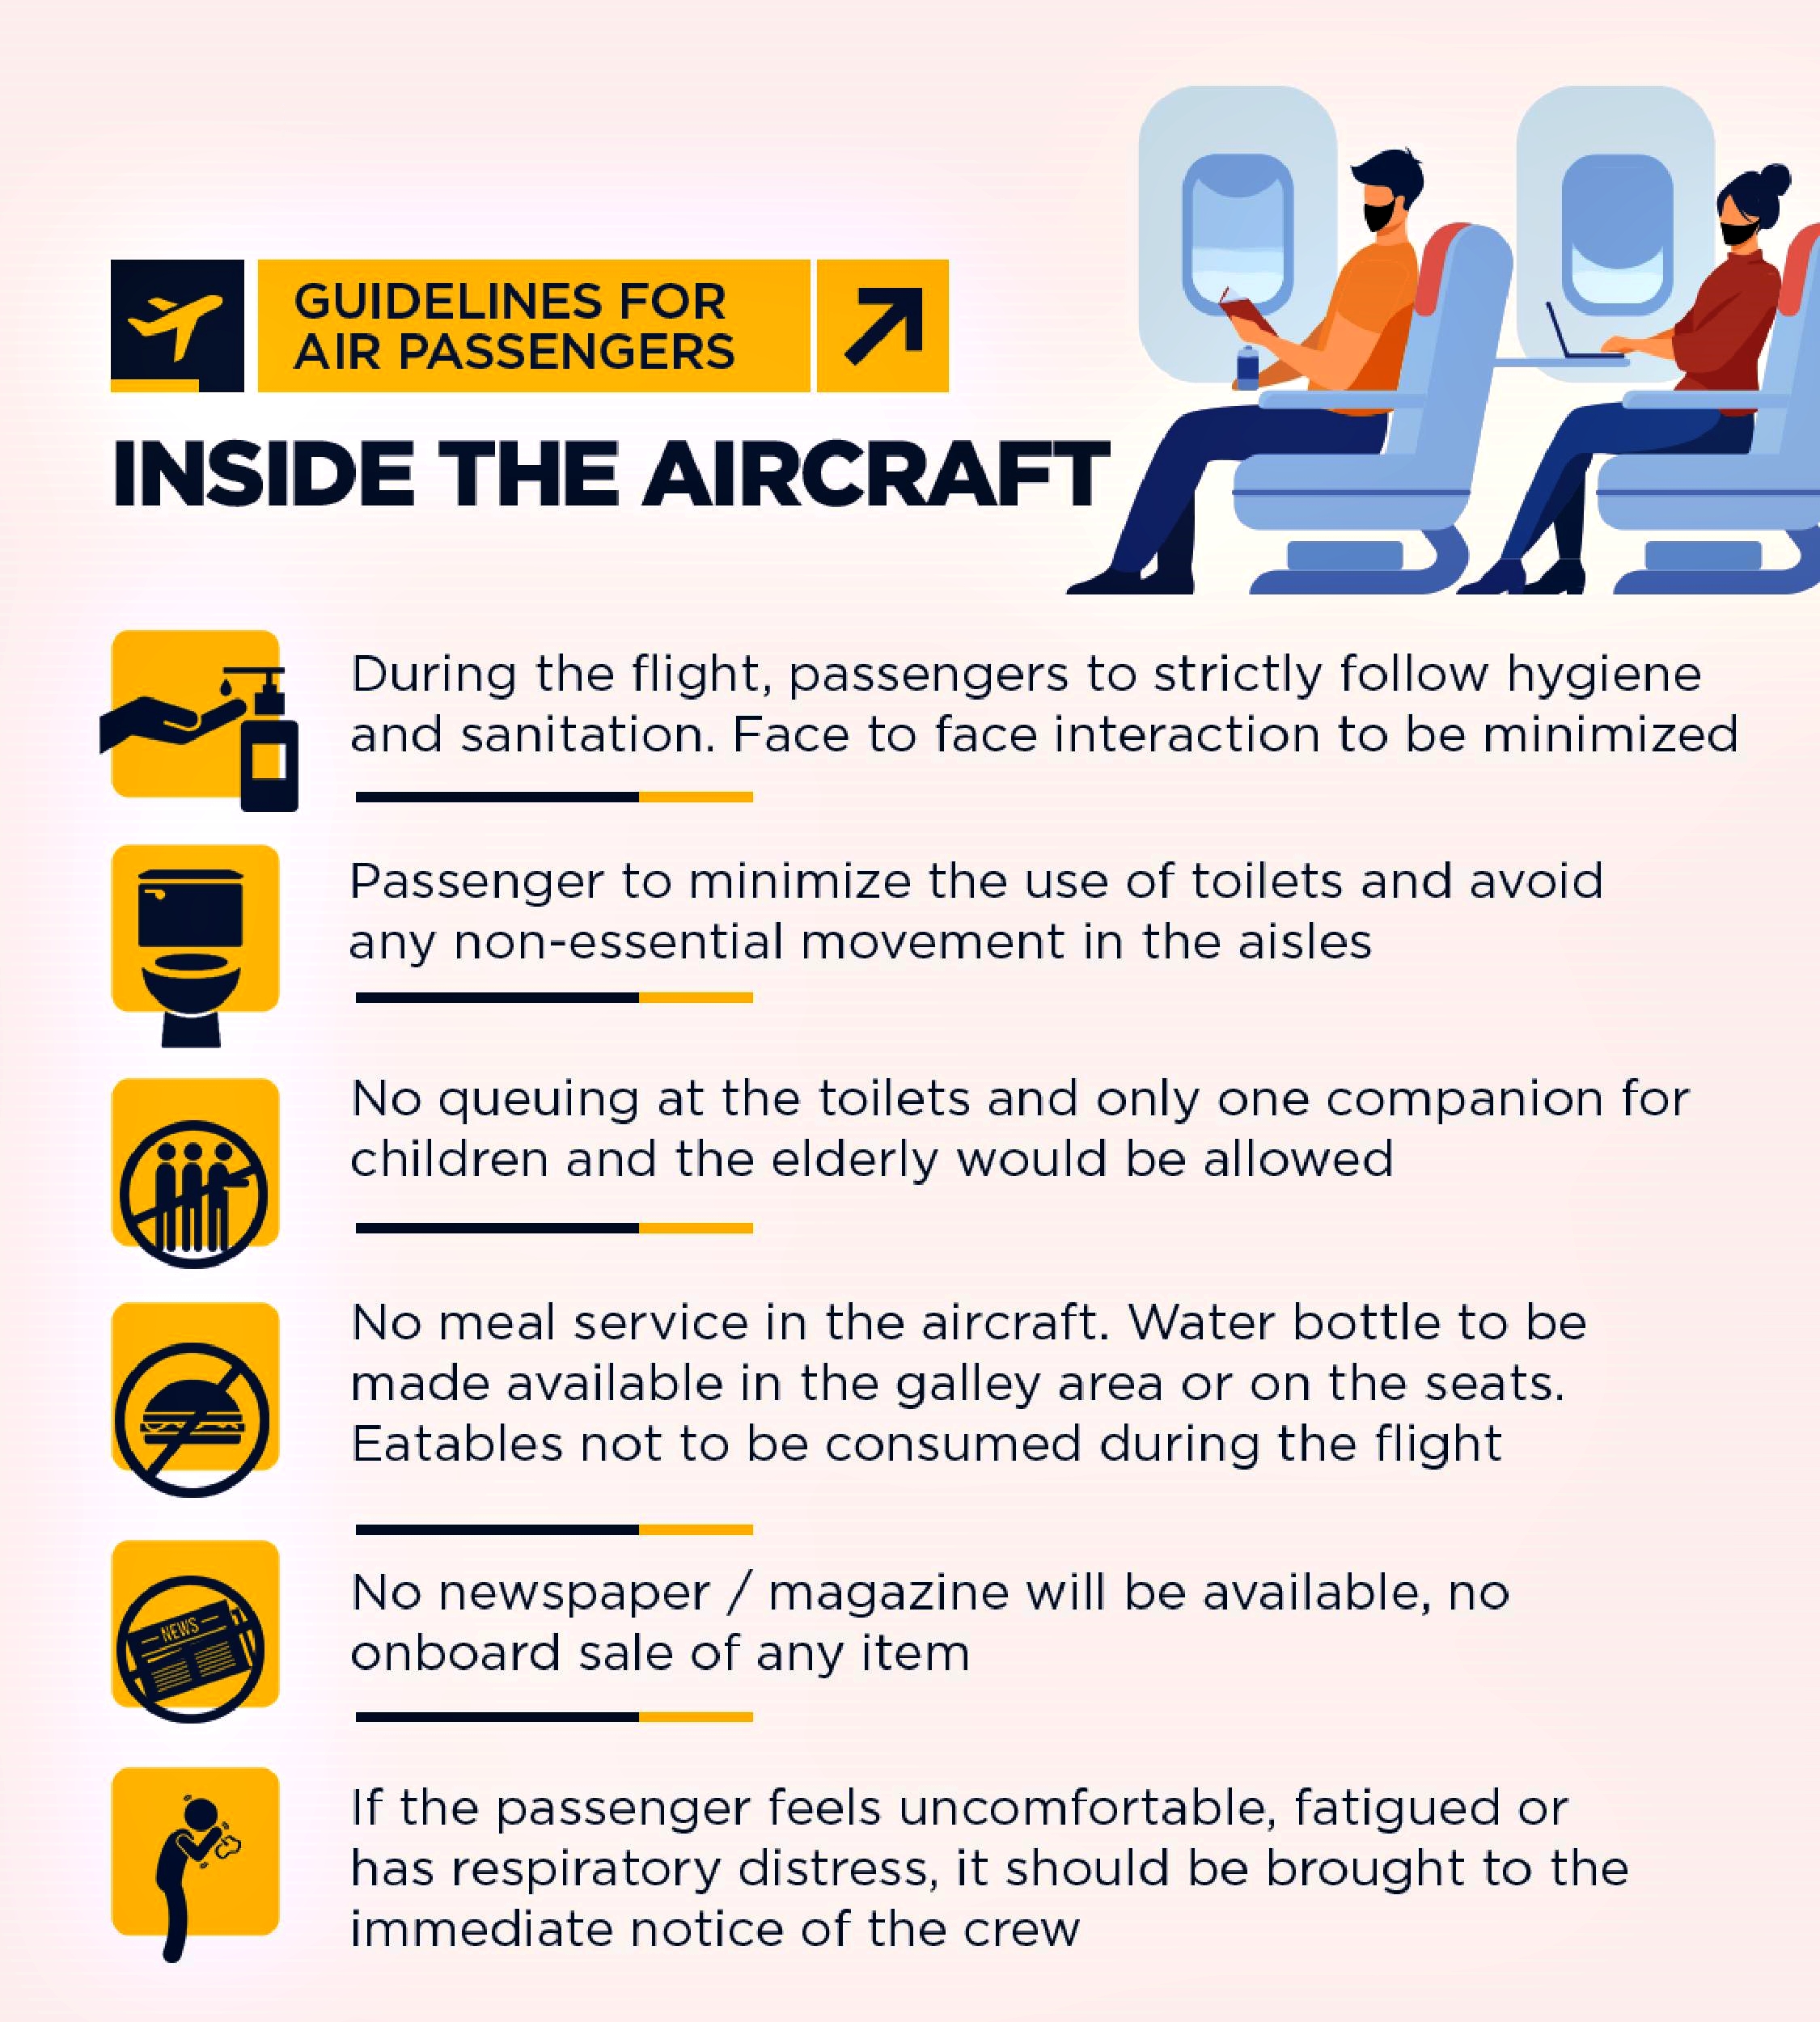 Guidelines for Passengers